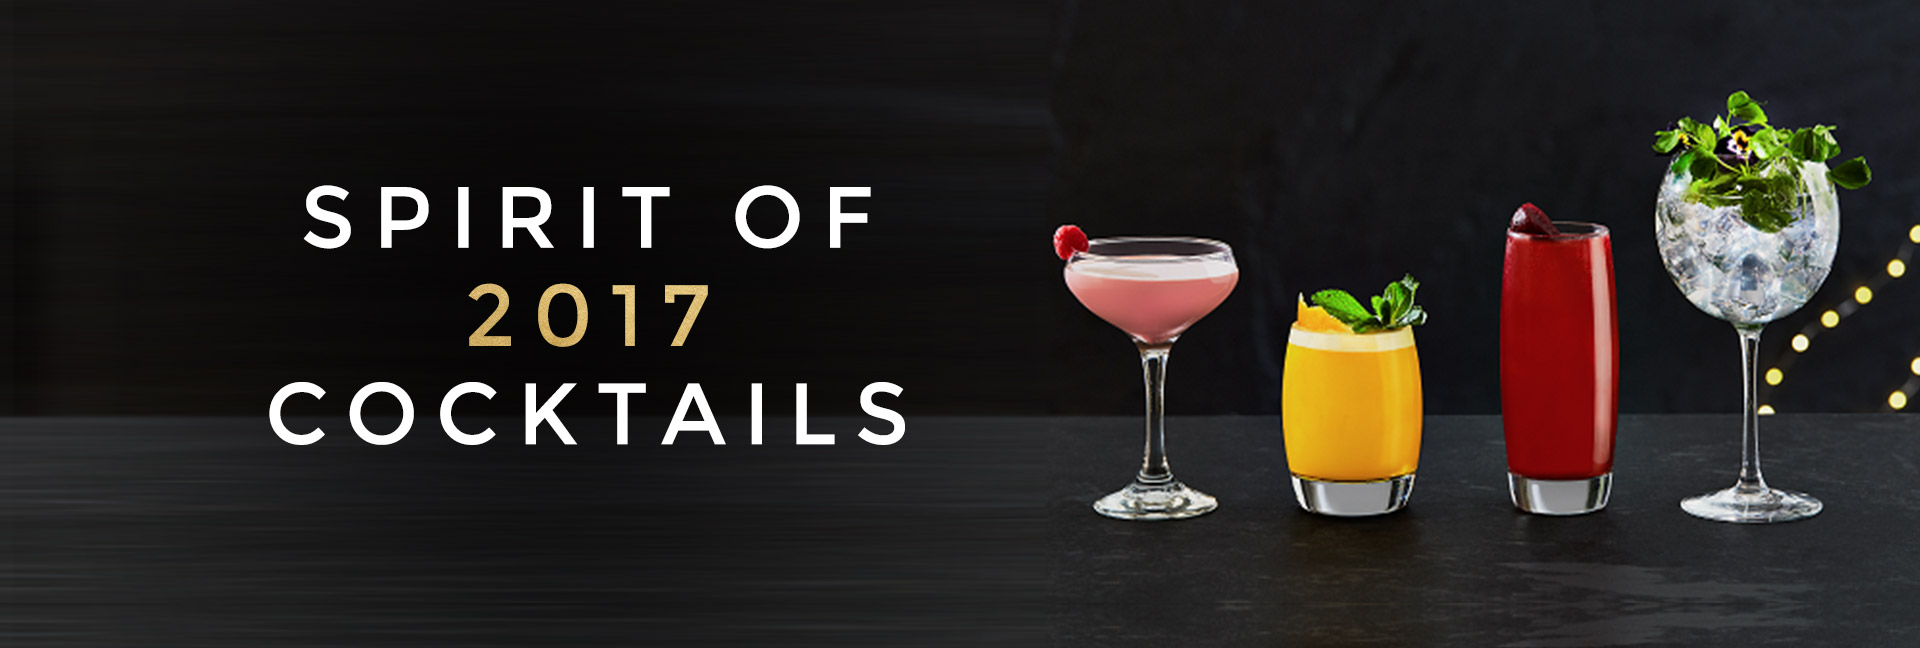 Spirit of 2017 cocktails at All Bar One Sutton